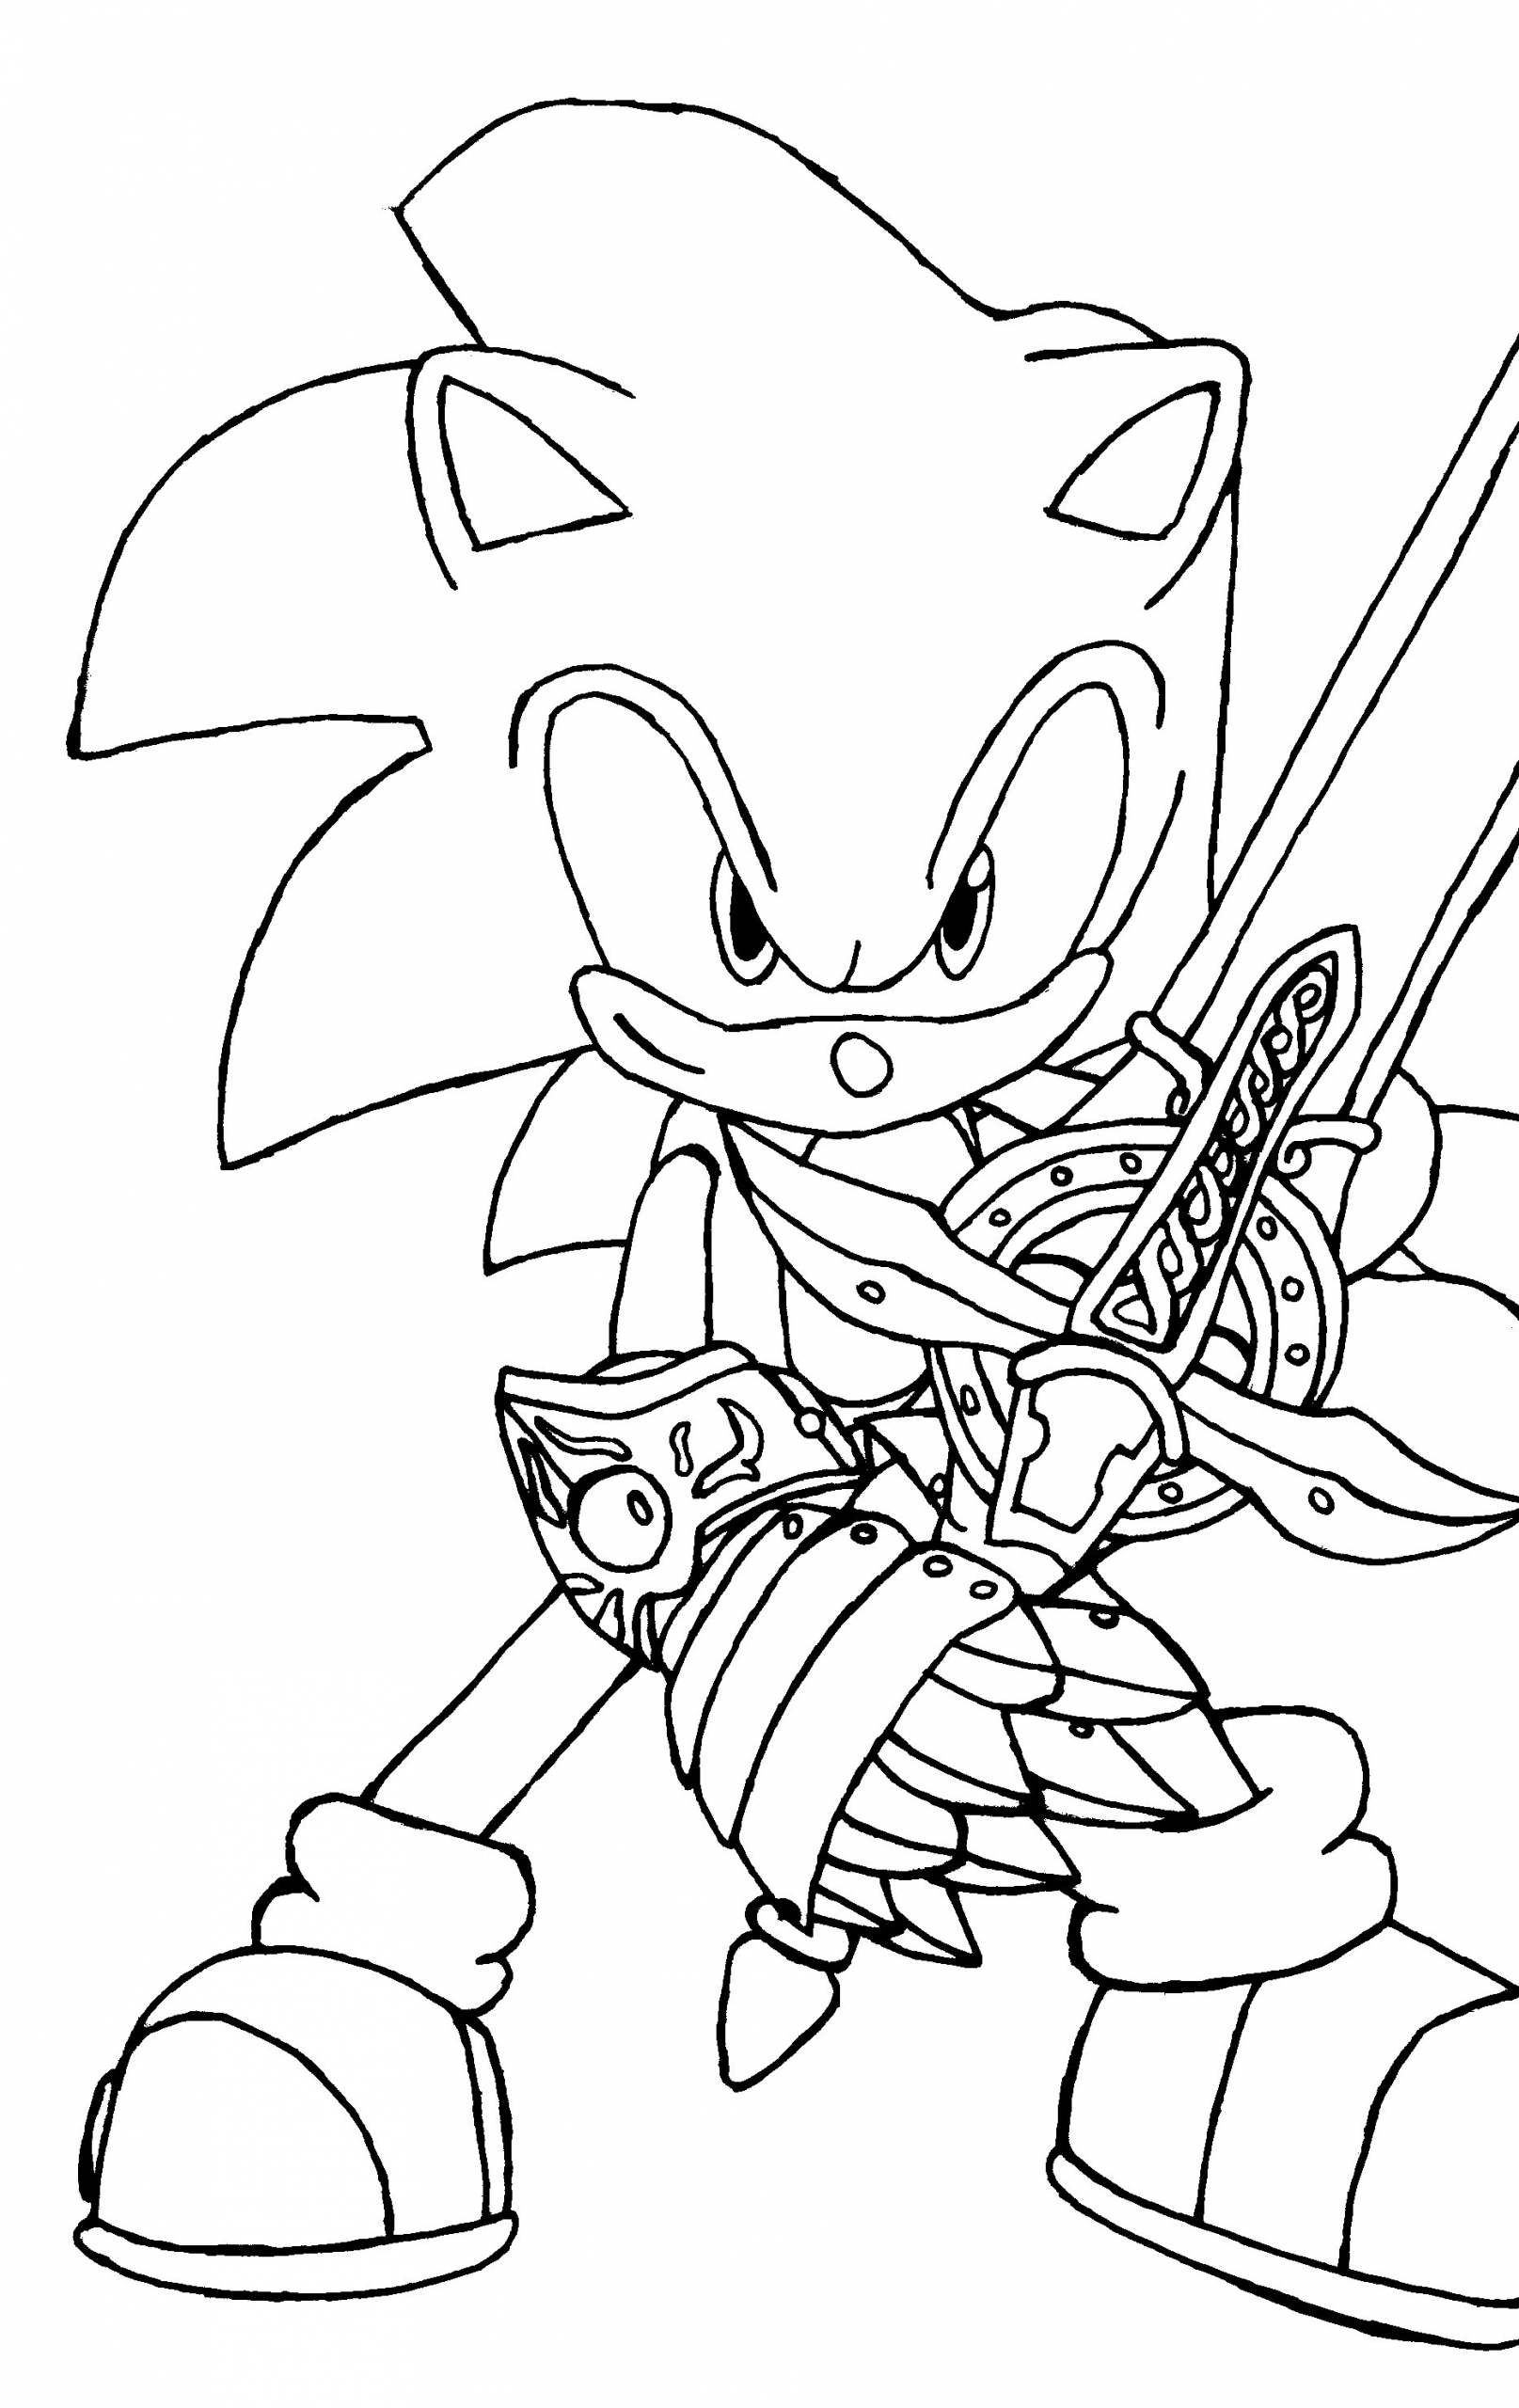 Kids Coloring Pages Online
 Free Printable Sonic The Hedgehog Coloring Pages For Kids